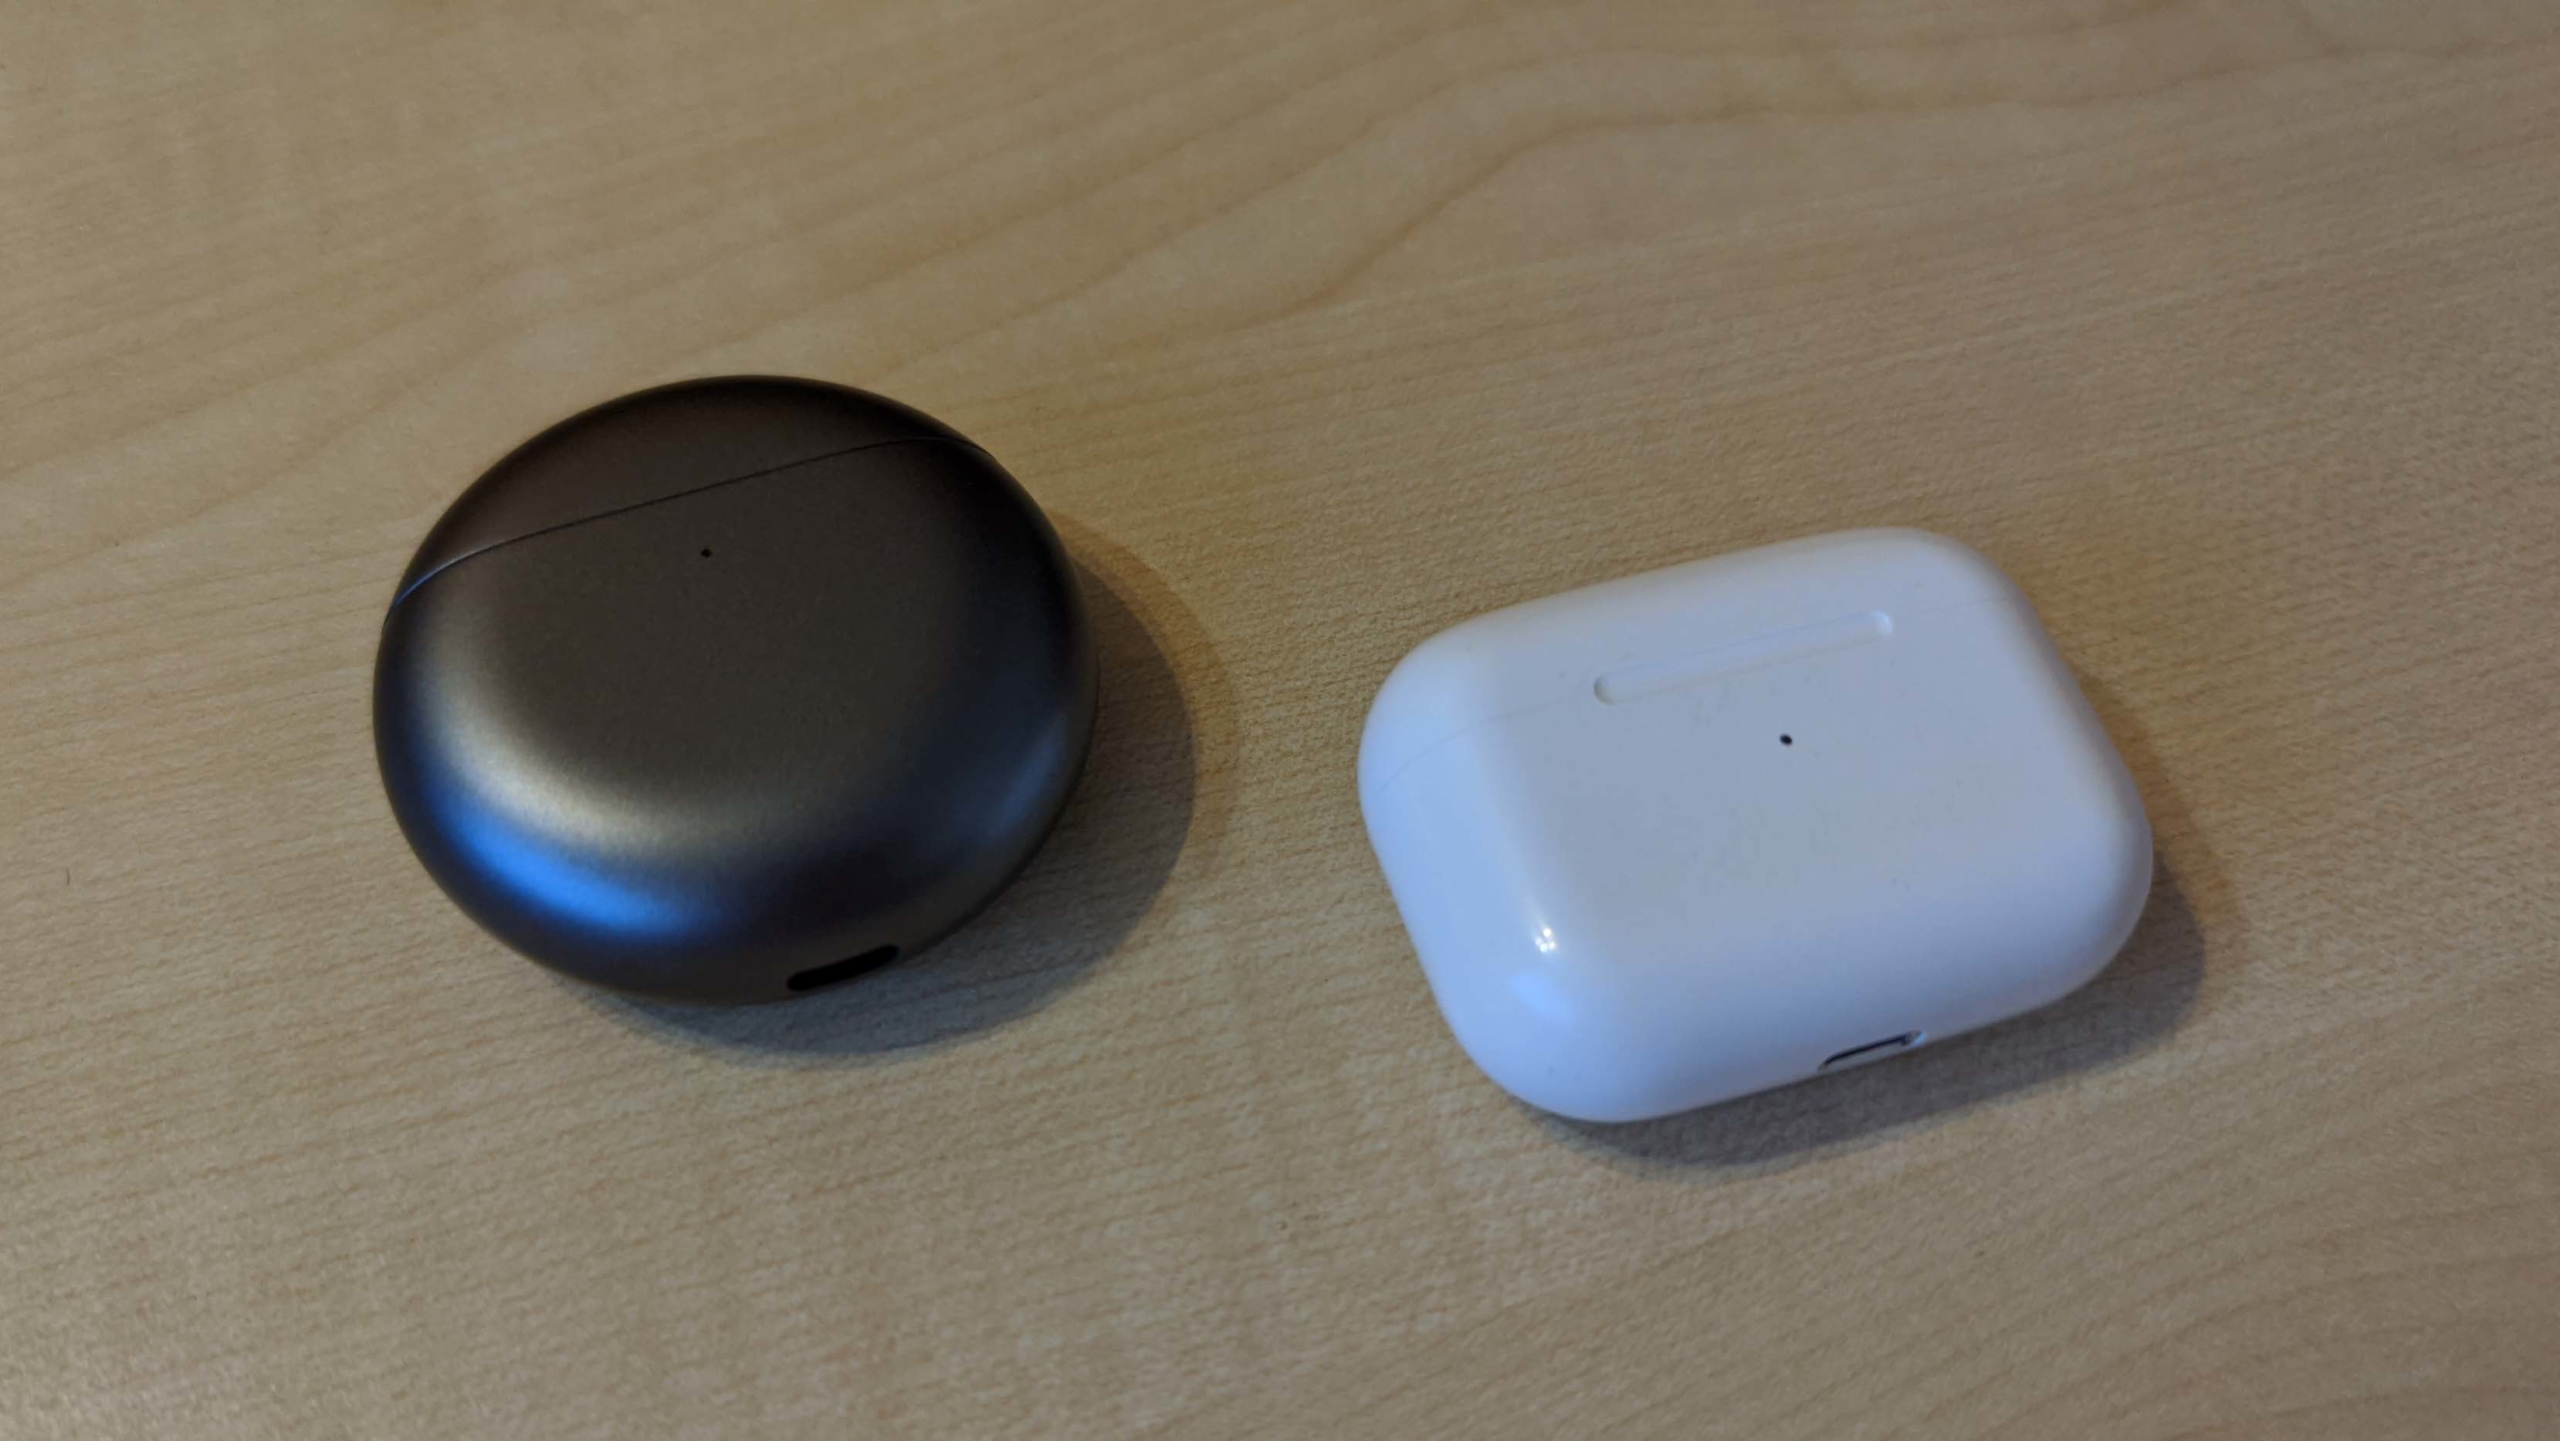 Huawei FreeBuds 4 - Comparaison des tailles AirPods Pro